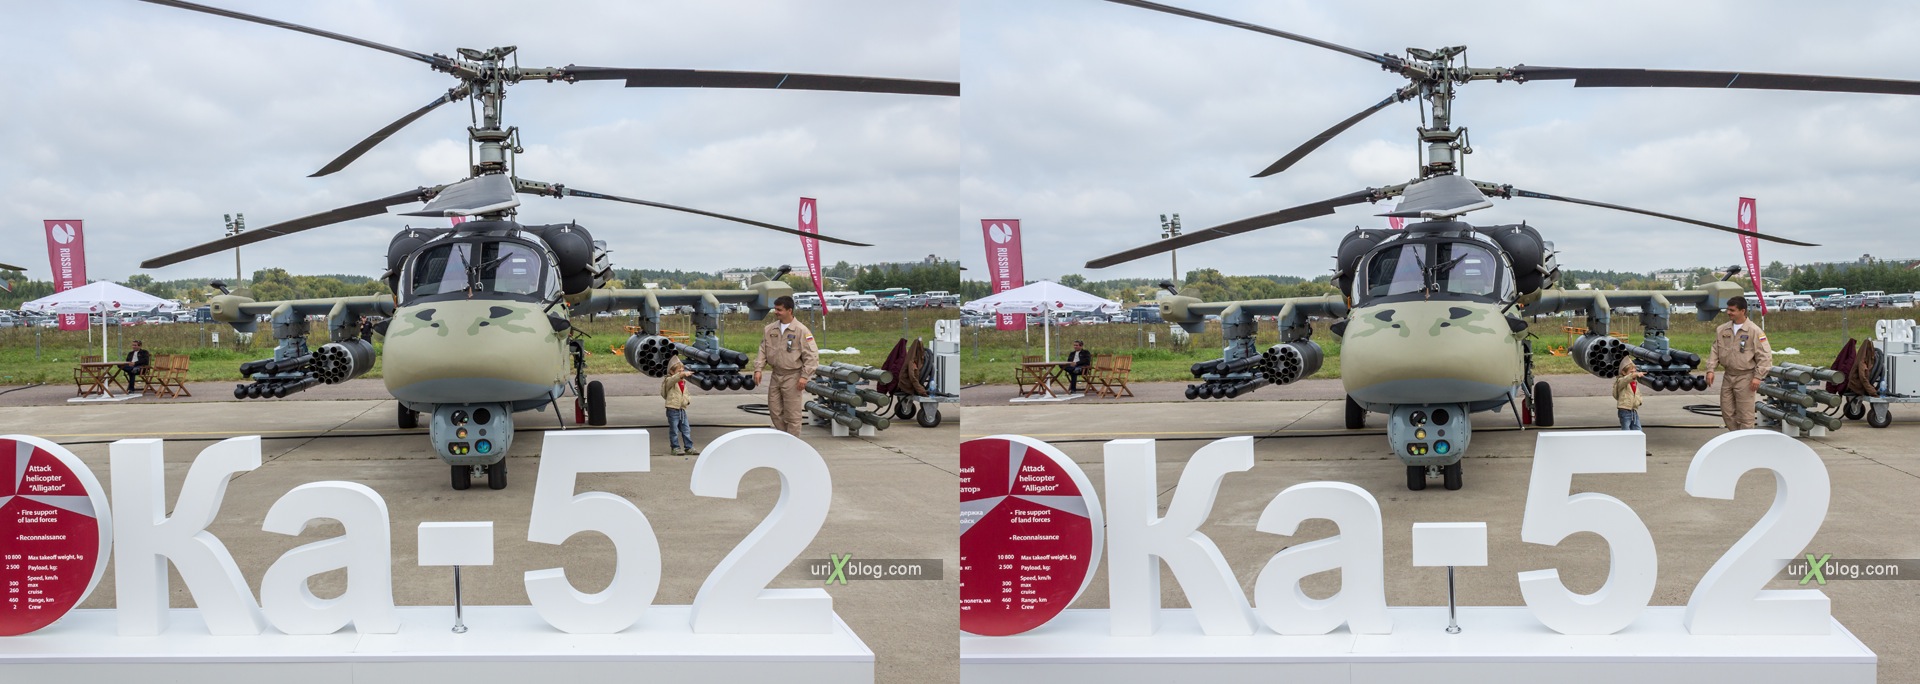 2013, MAKS, International Aviation and Space Salon, Russia, Ramenskoye airfield, Ka-52 Alligator, helicopter, 3D, stereo pair, cross-eyed, crossview, cross view stereo pair, stereoscopic